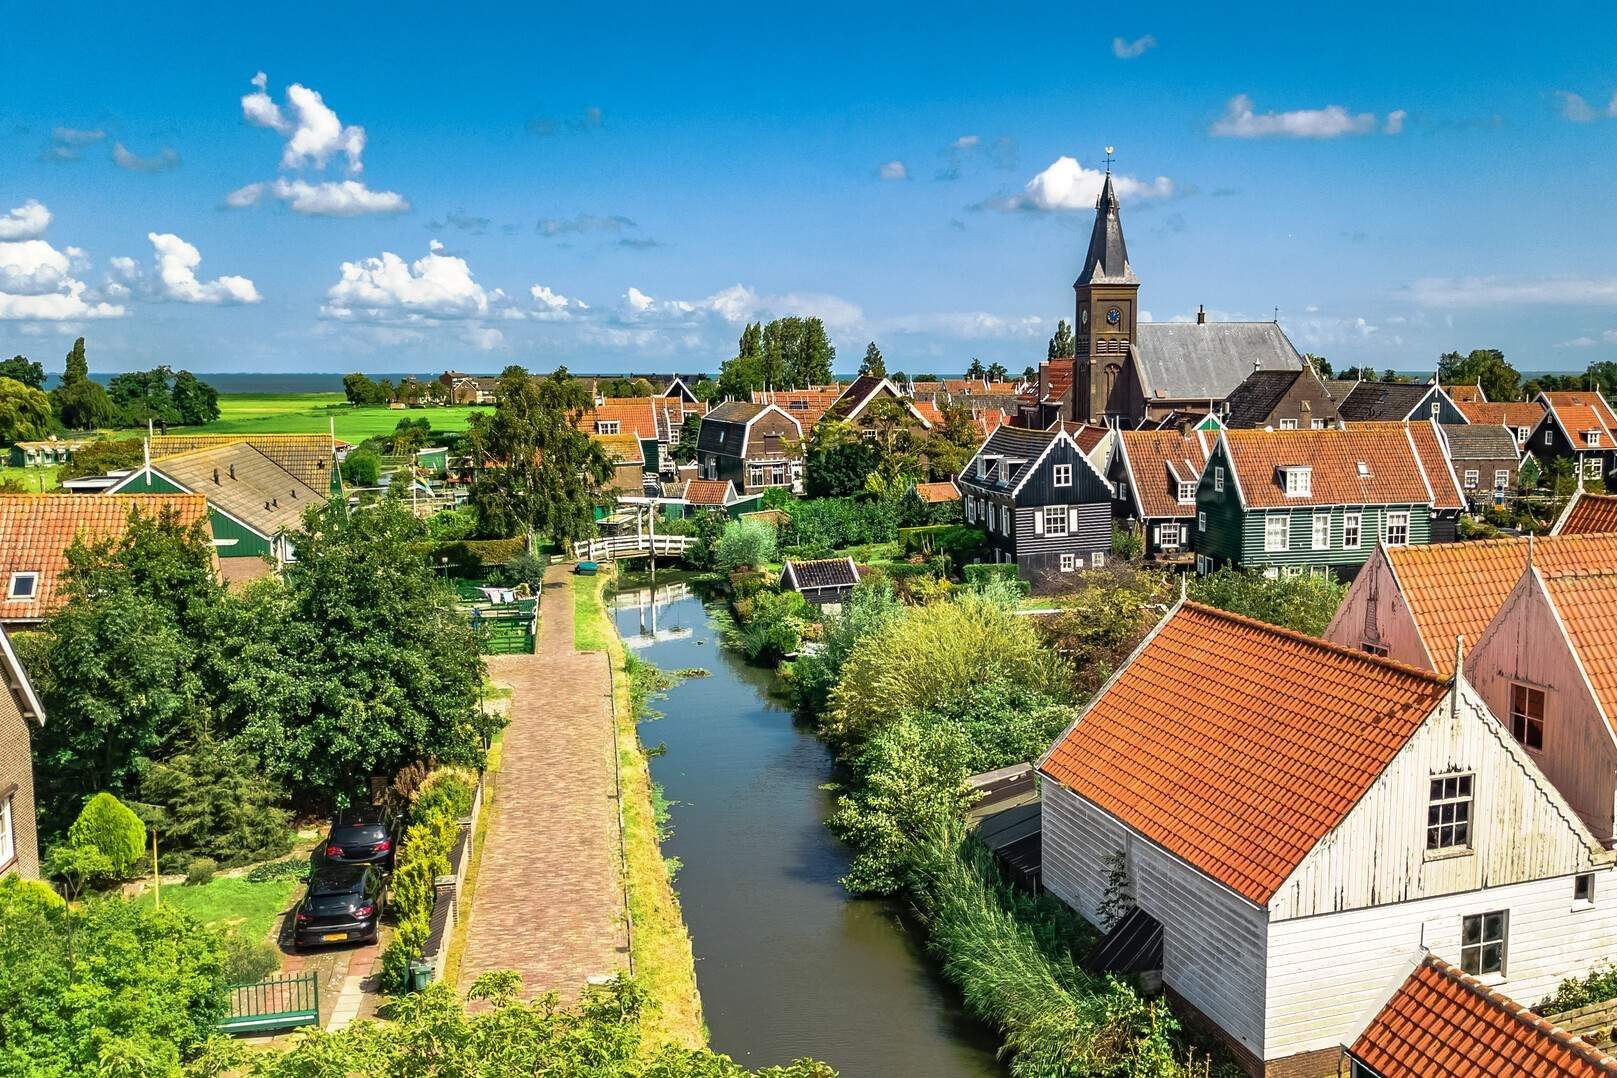 A water canal across a cluster of residences with red tile roofs in a rural village.